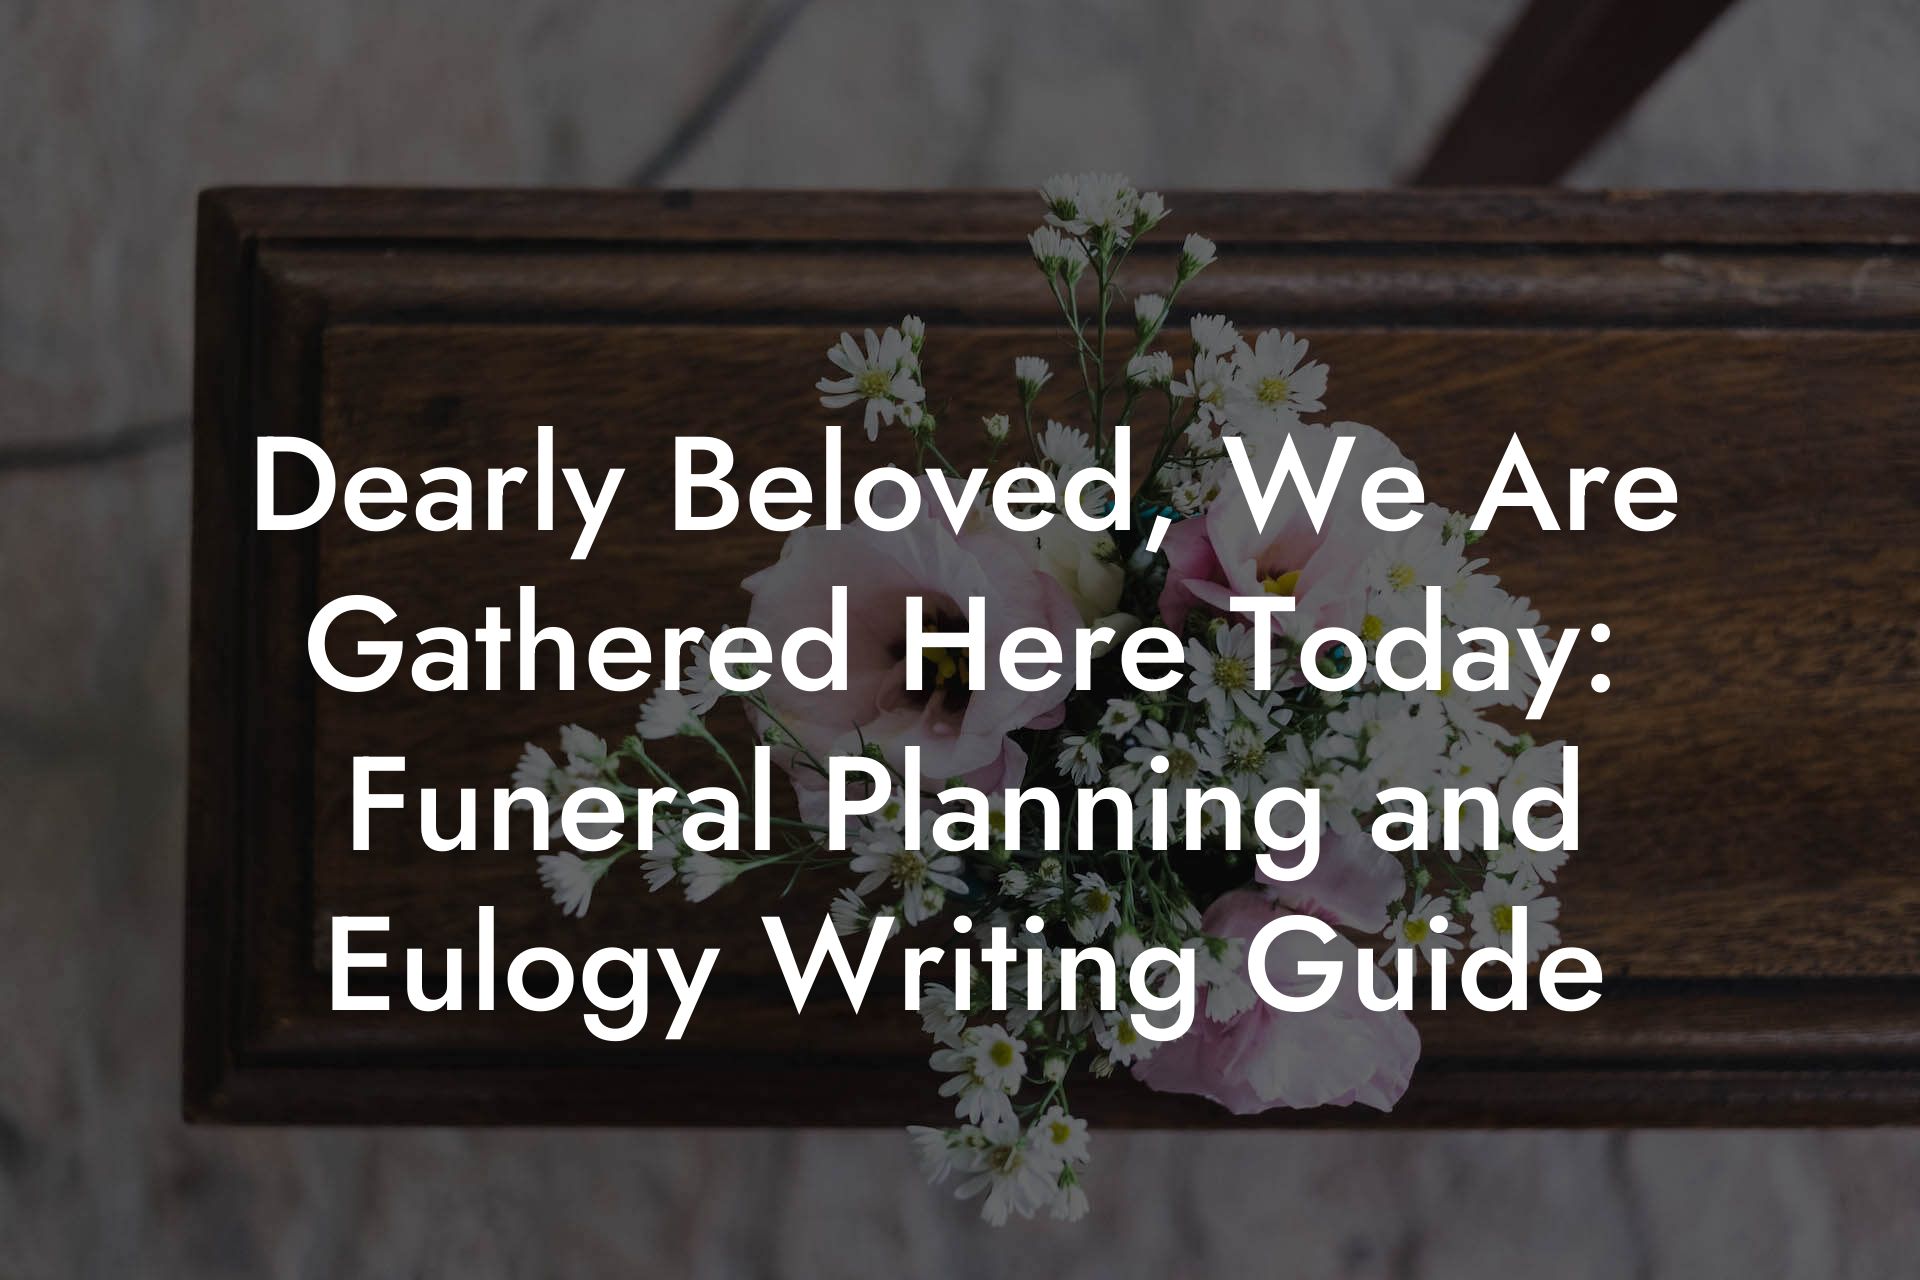 Dearly Beloved, We Are Gathered Here Today: Funeral Planning and Eulogy Writing Guide